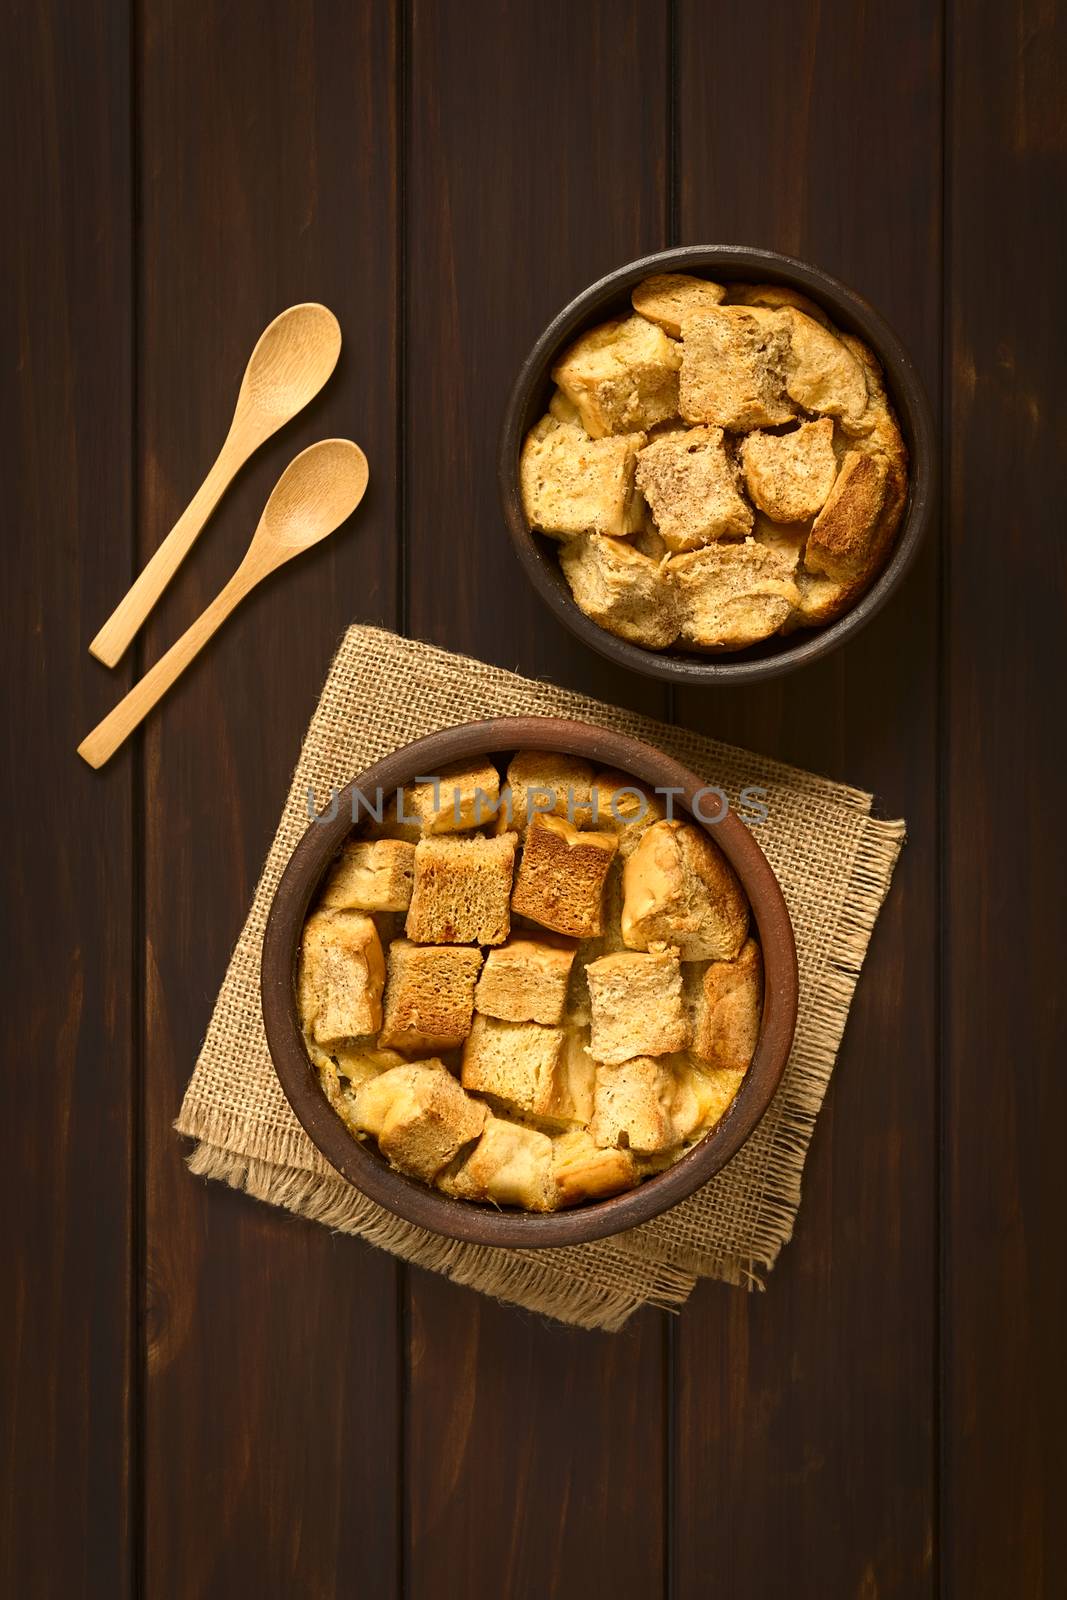 Overhead shot of two rustic bowls of bread pudding made of diced stale bread, milk, egg, cinnamon, sugar and butter, photographed on dark wood with natural light